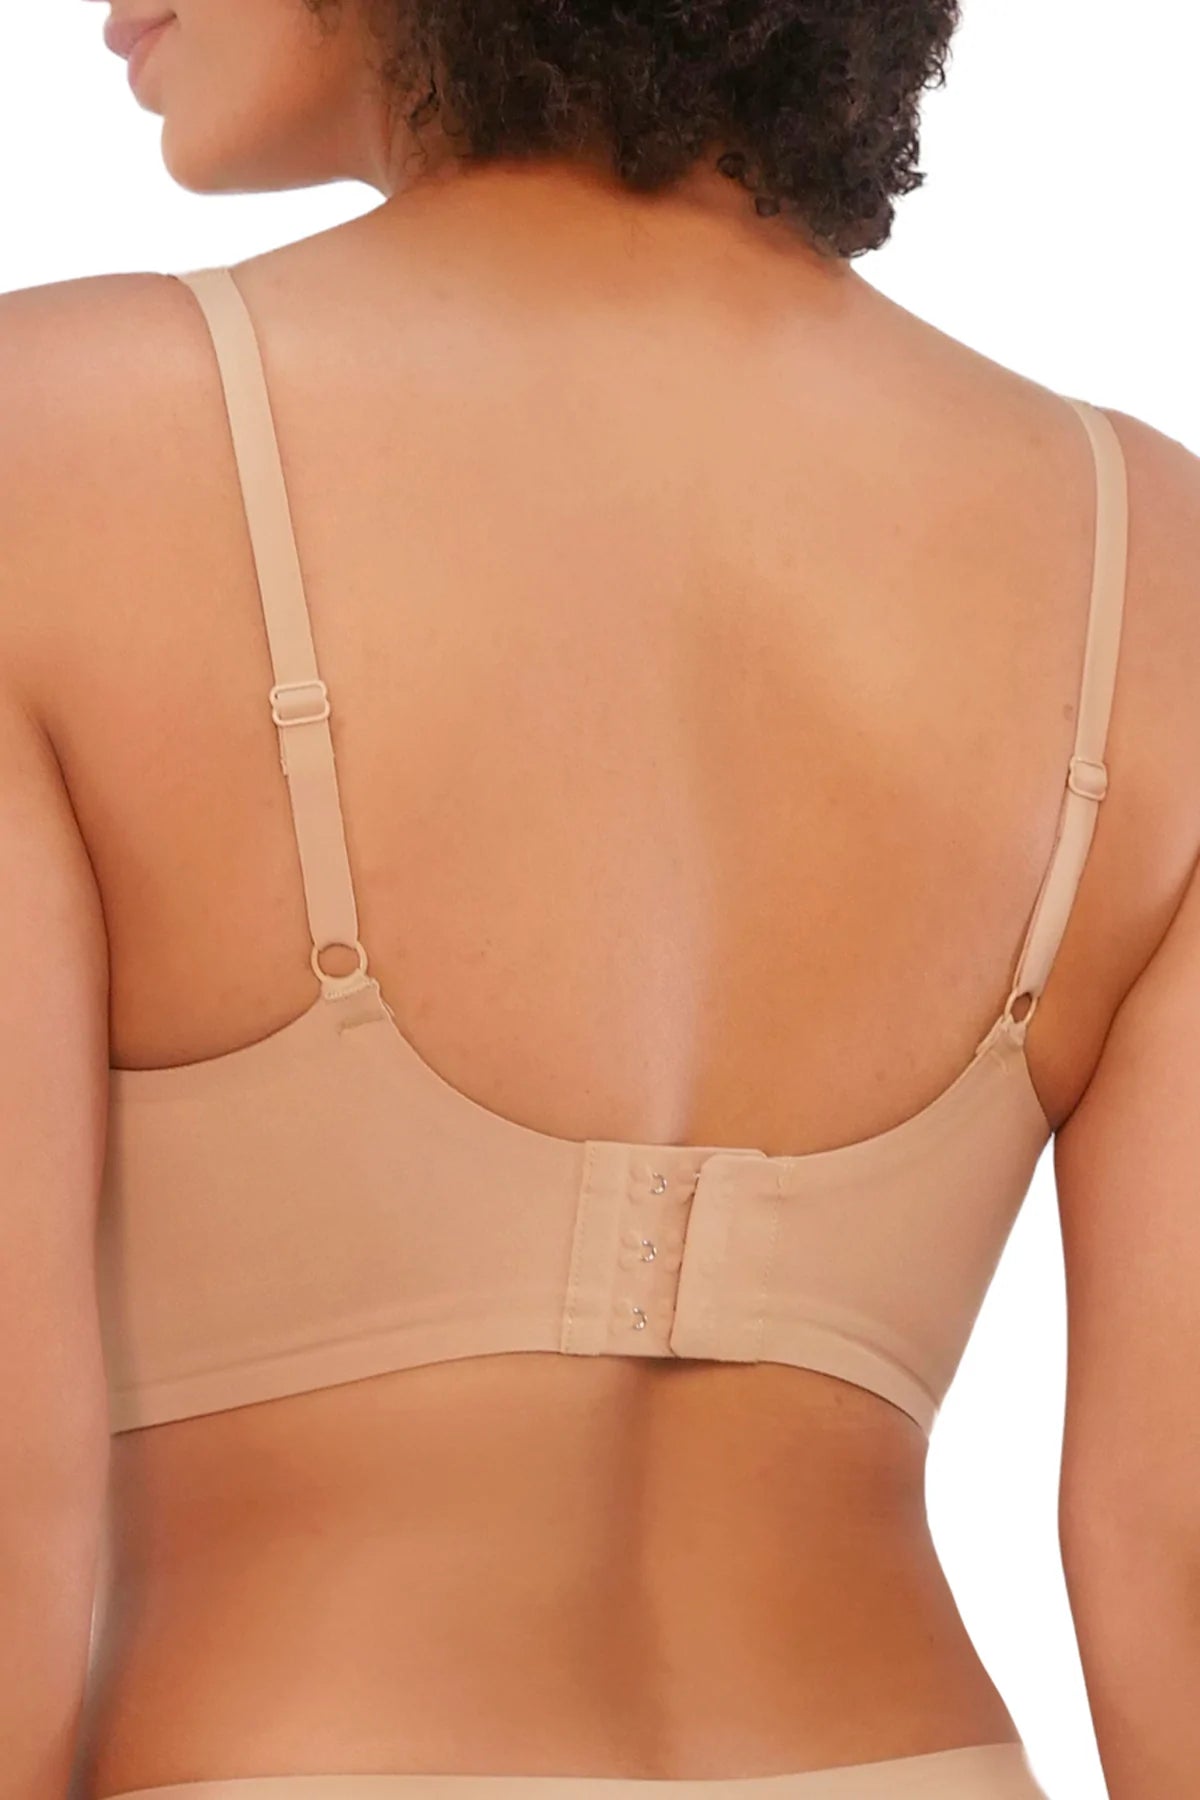 About: Modal Wireless Bra with Silver Ions - XL, Last One!